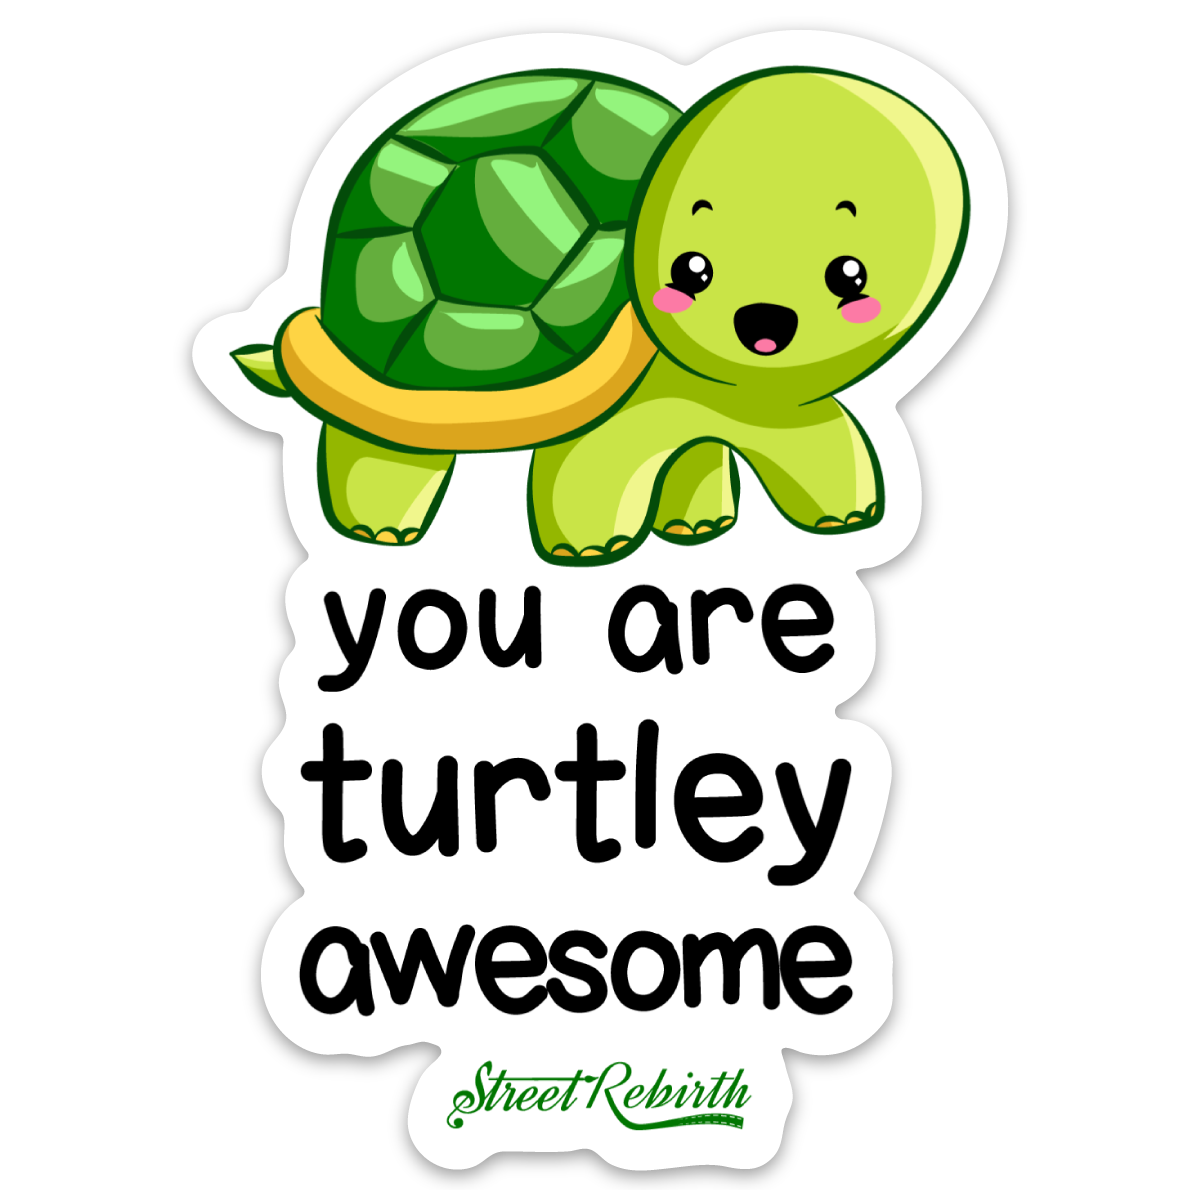 YOU ARE TURTLEY AWESOME STICKER – ONE 4 INCH WATER PROOF VINYL STICKER – FOR HYDRO FLASK, SKATEBOARD, LAPTOP, PLANNER, CAR, COLLECTING, GIFTING